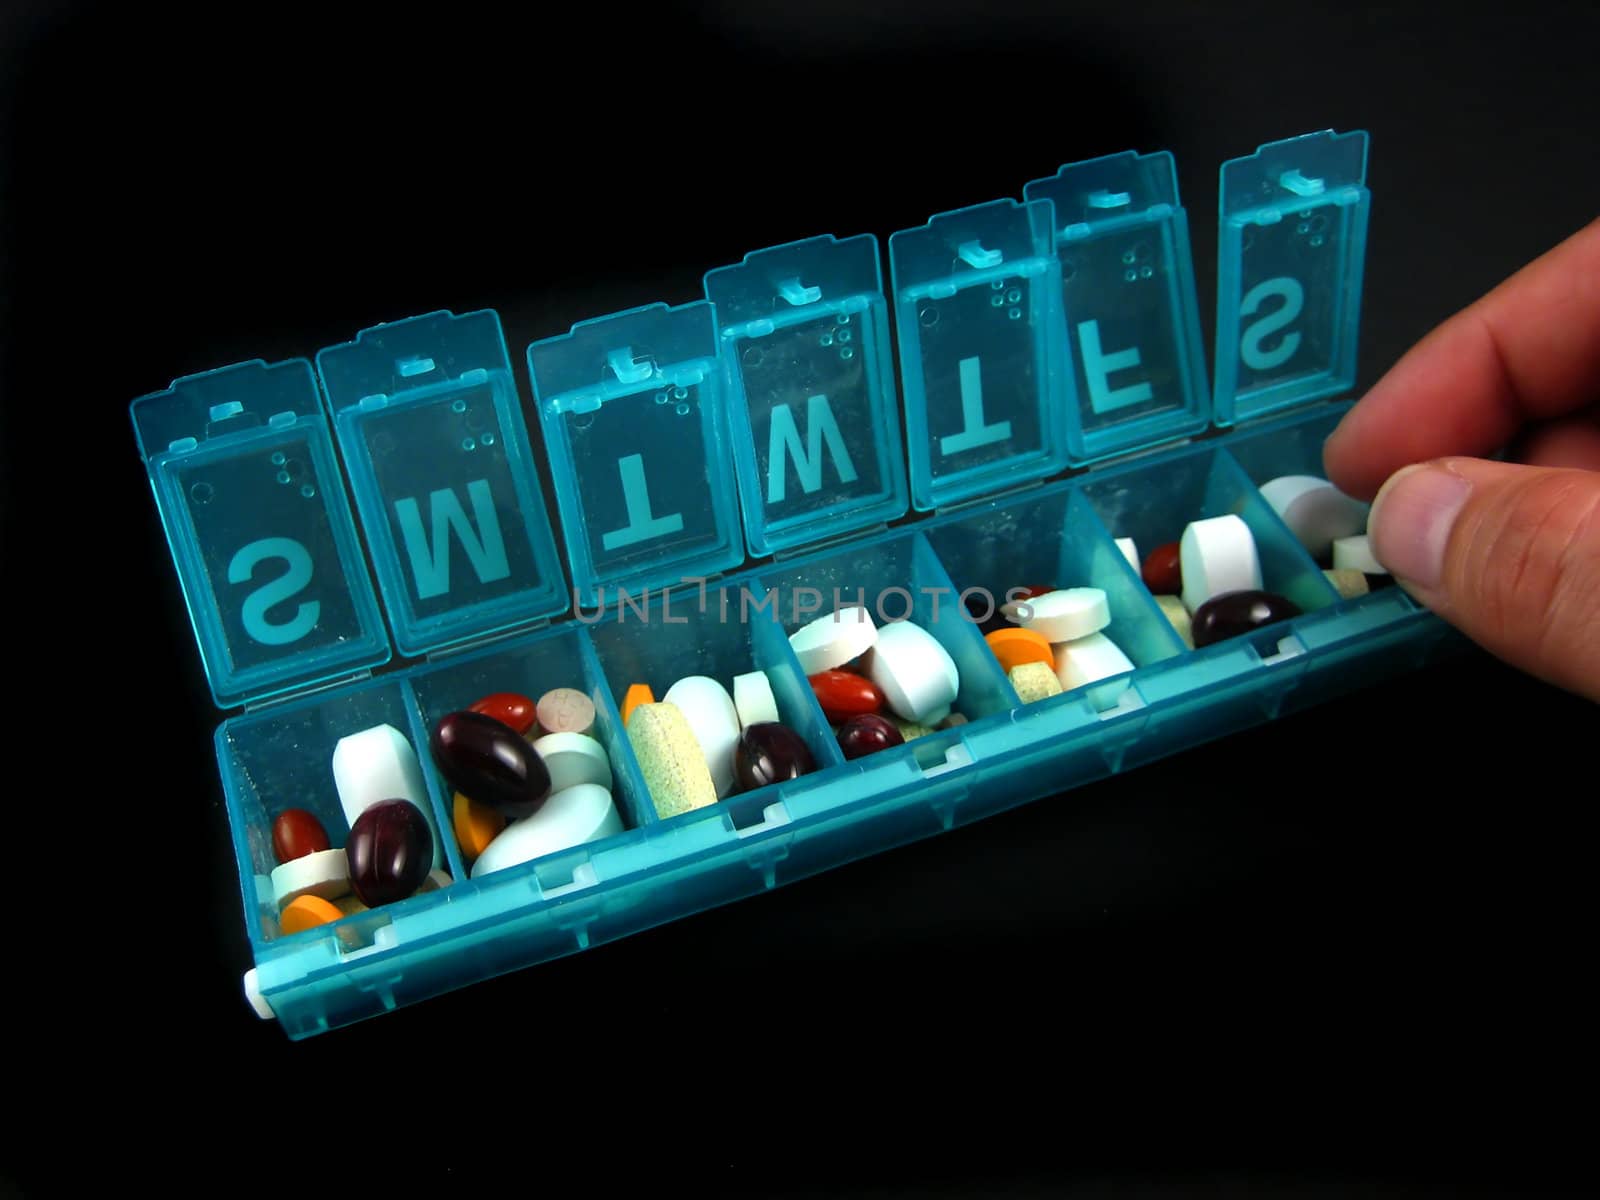 Pictures of medicine, pills and pharmaceuticals